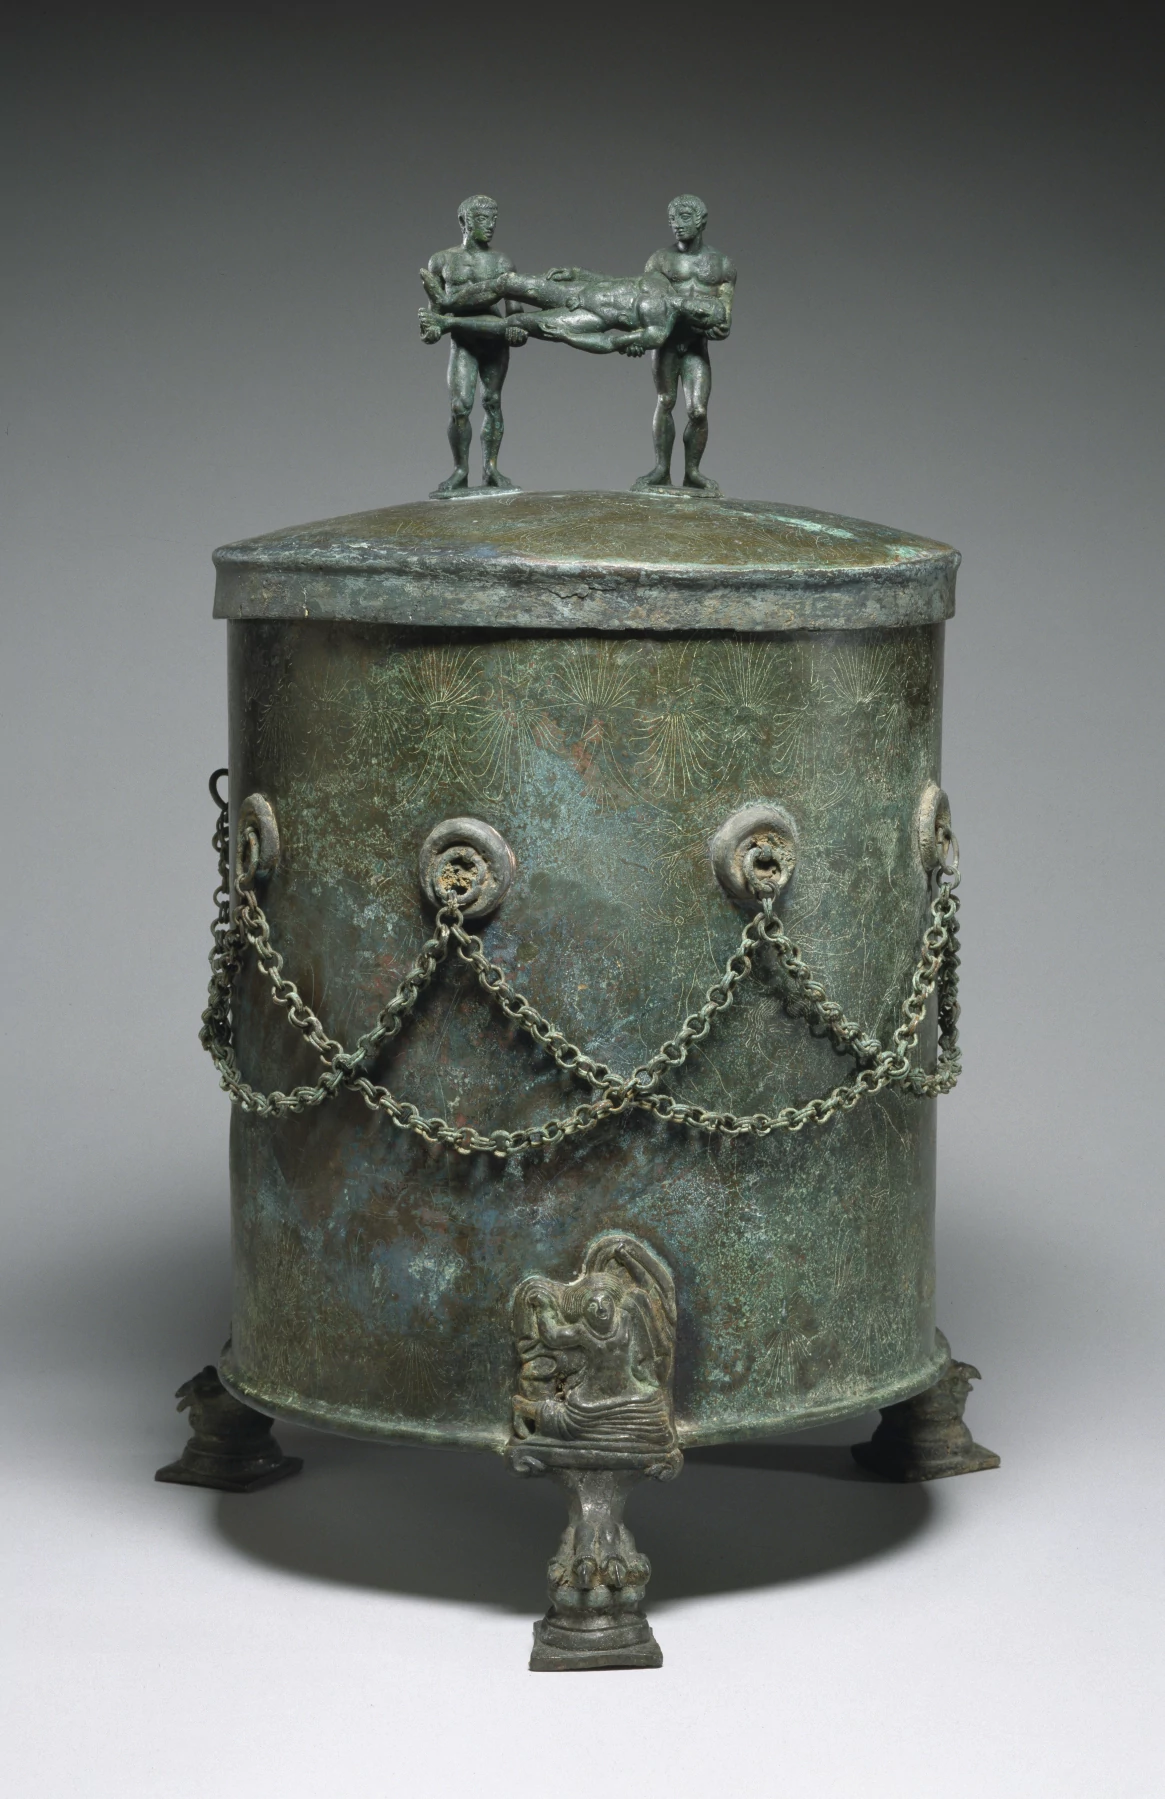 Cista Depicting a Dionysian Revel and Perseus with Medusa's Head, The Etruscans